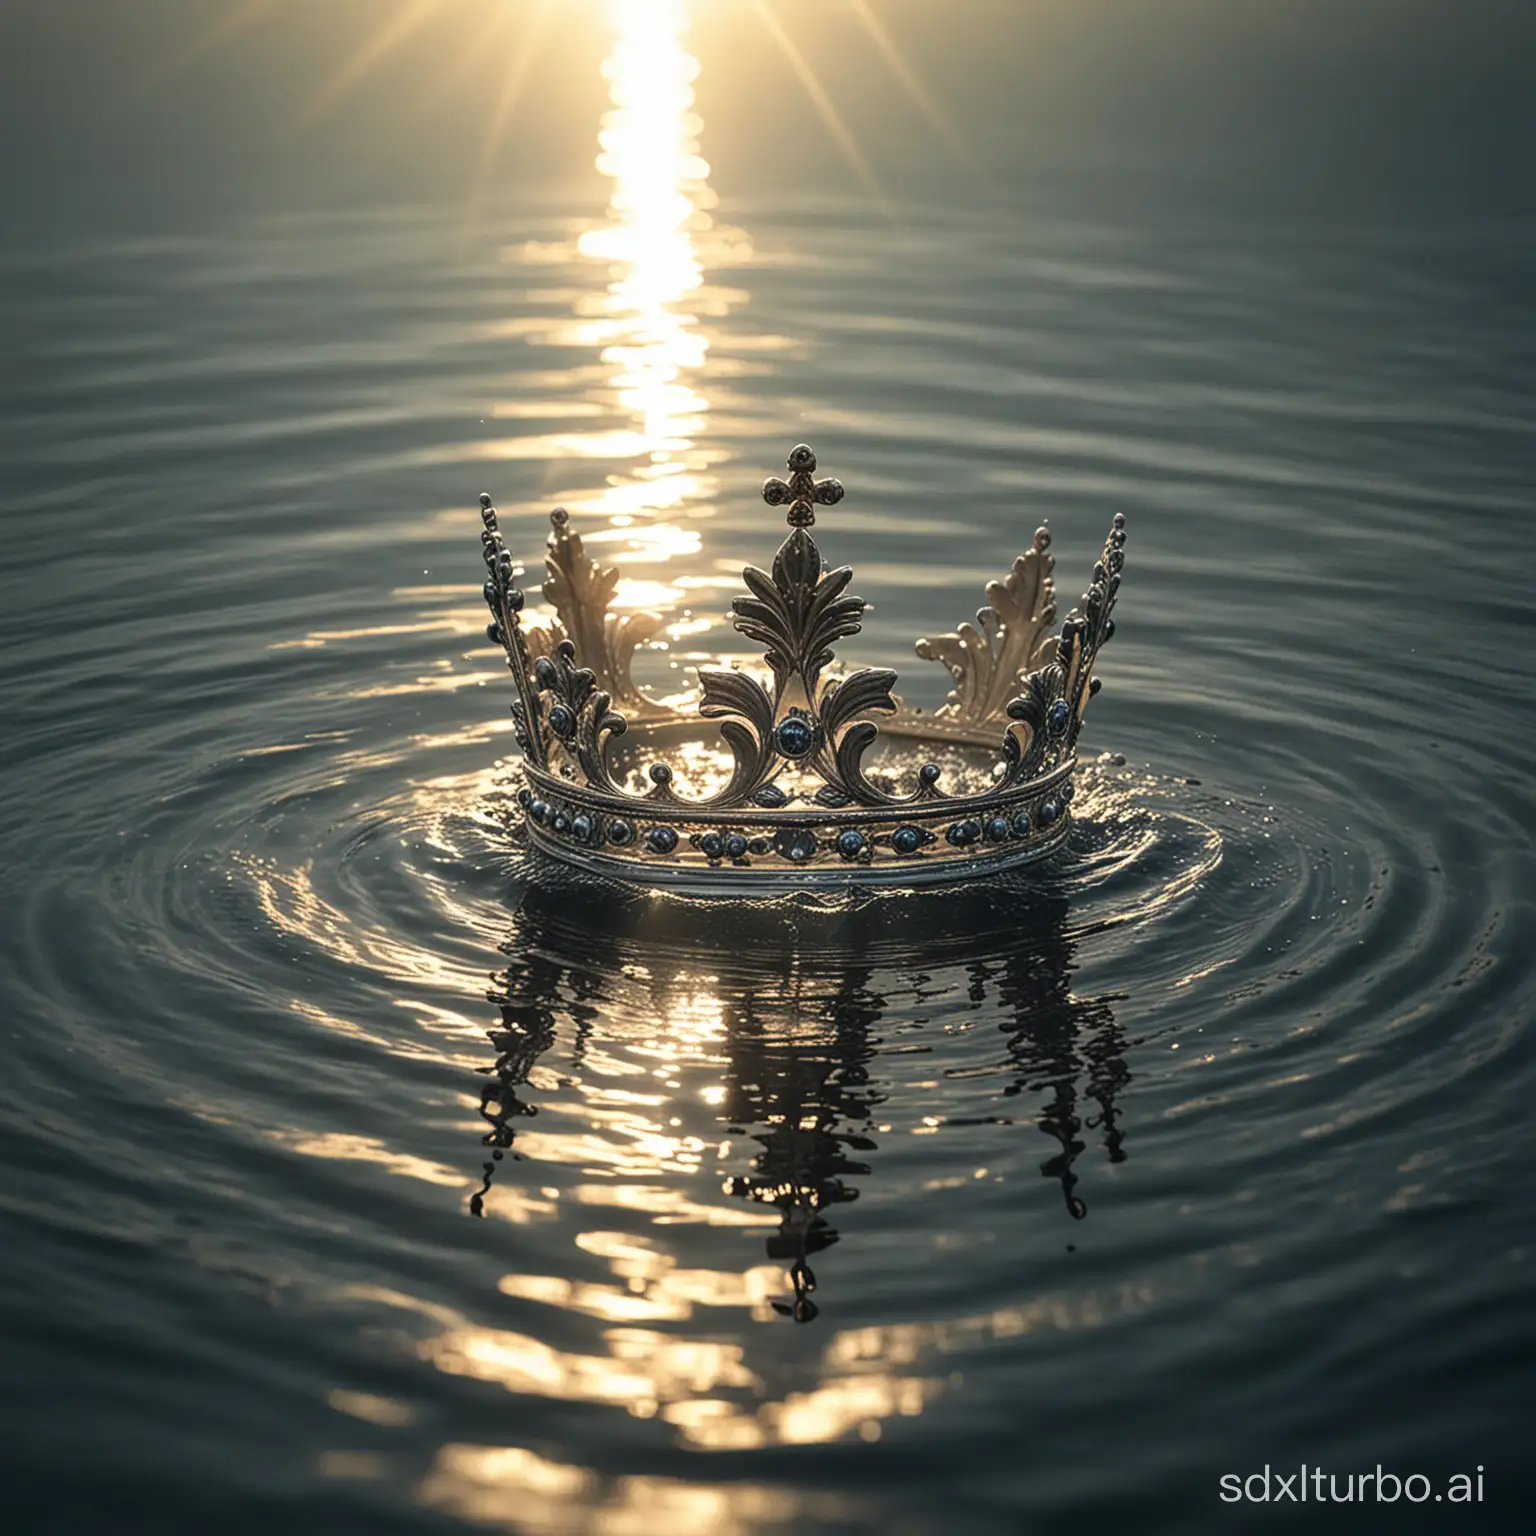 A shining crown on the water